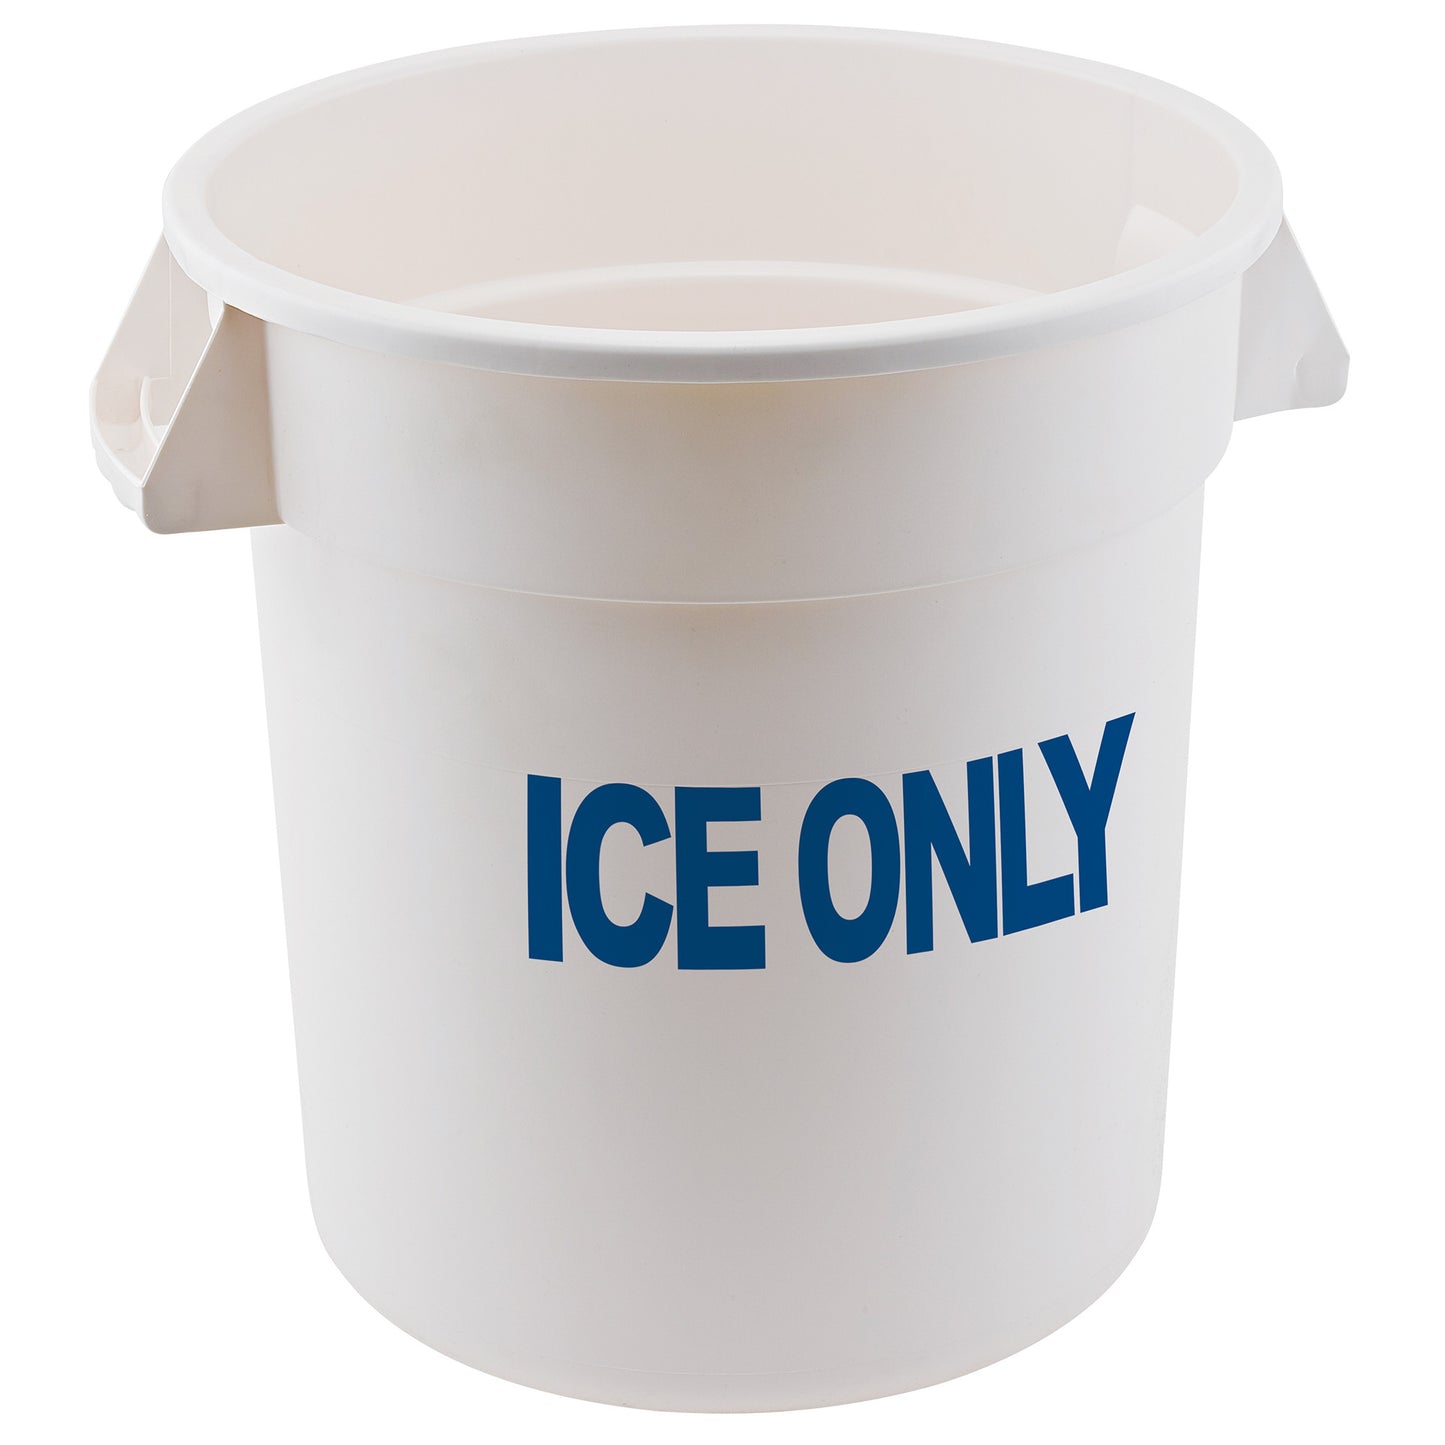 FCW-10ICE - "ICE ONLY" Container - 10 Gallon